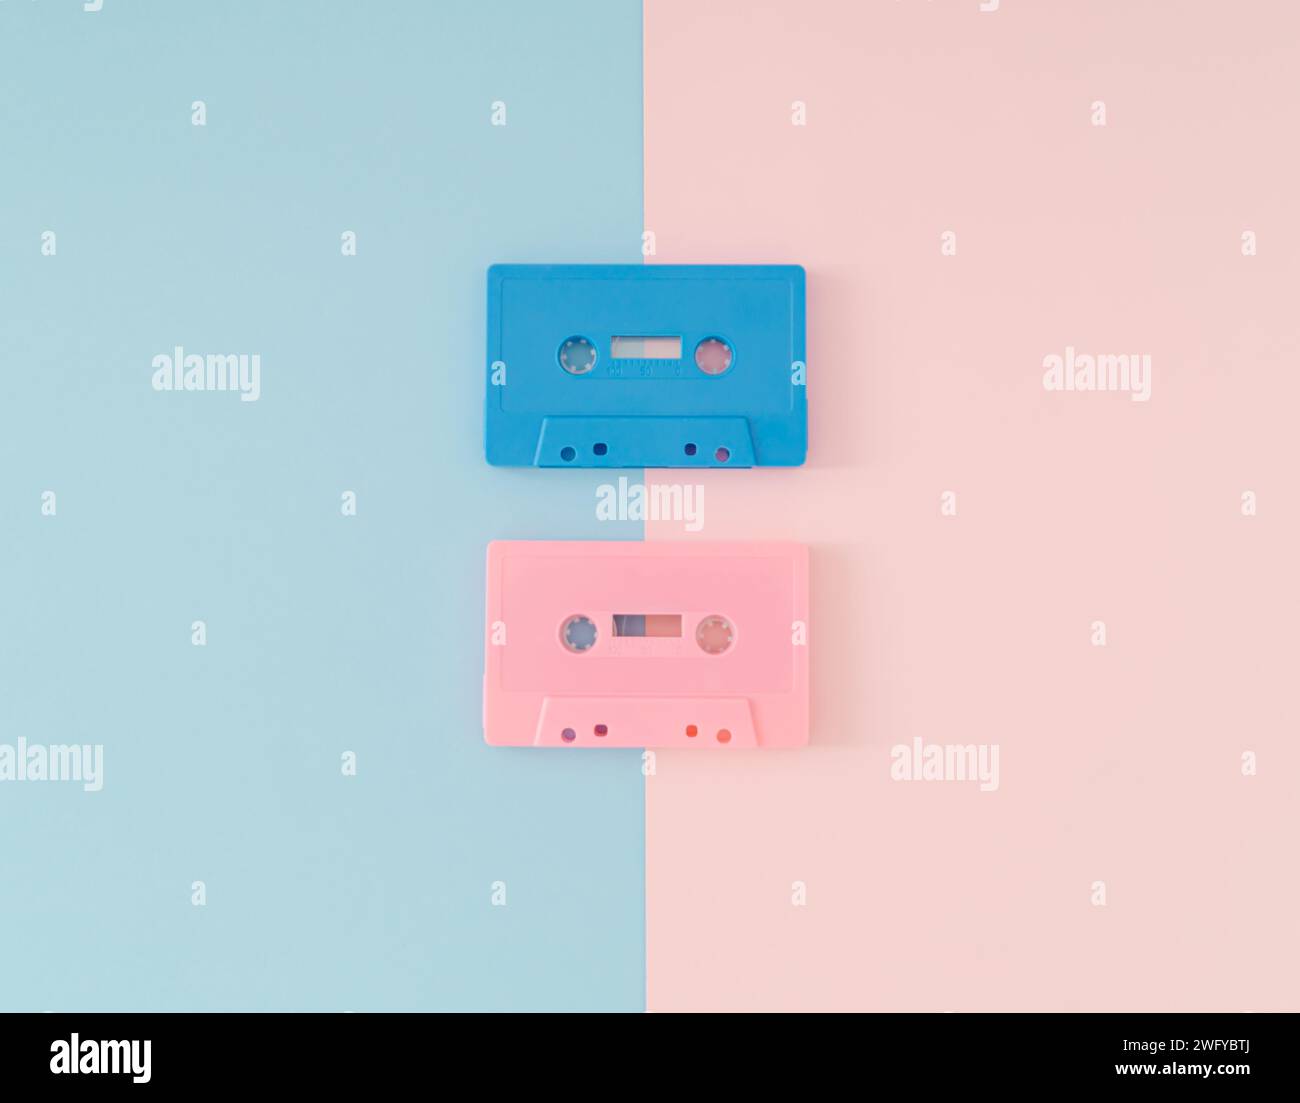 Layout of retro pink and blue audio cassette tapes on light pastel pink and blue background. Creative concept of retro technology. 80's aesthetic. Stock Photo